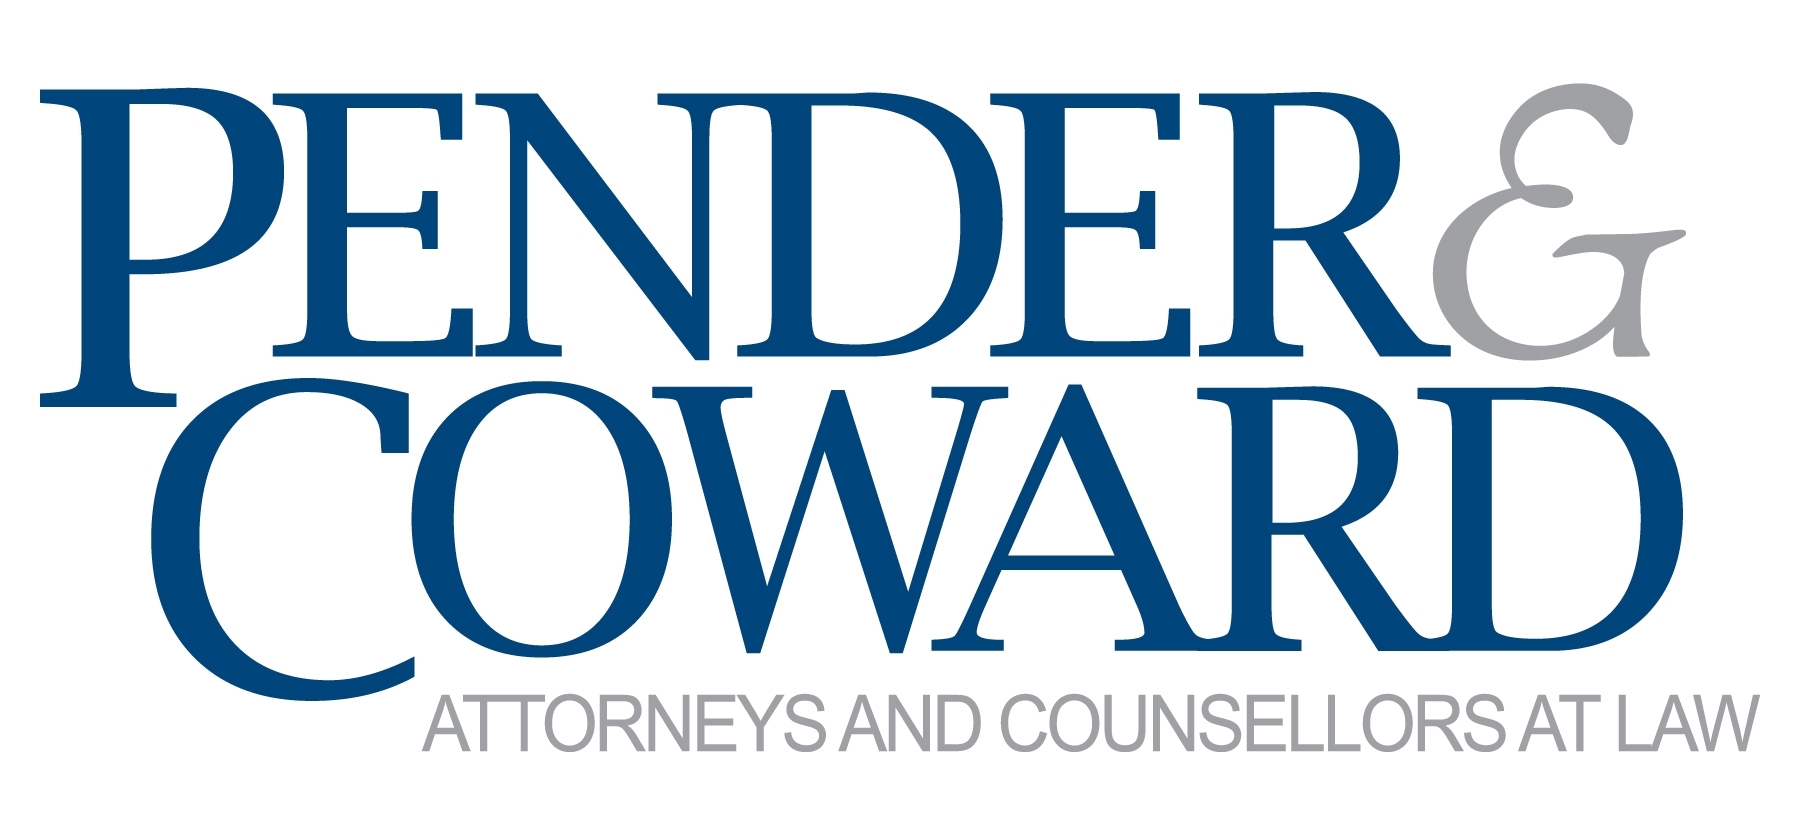 TEN PENDER & COWARD ATTORNEYS RECOGNIZED AS 2017 VIRGINIA SUPER LAWYERS AND RISING STARS